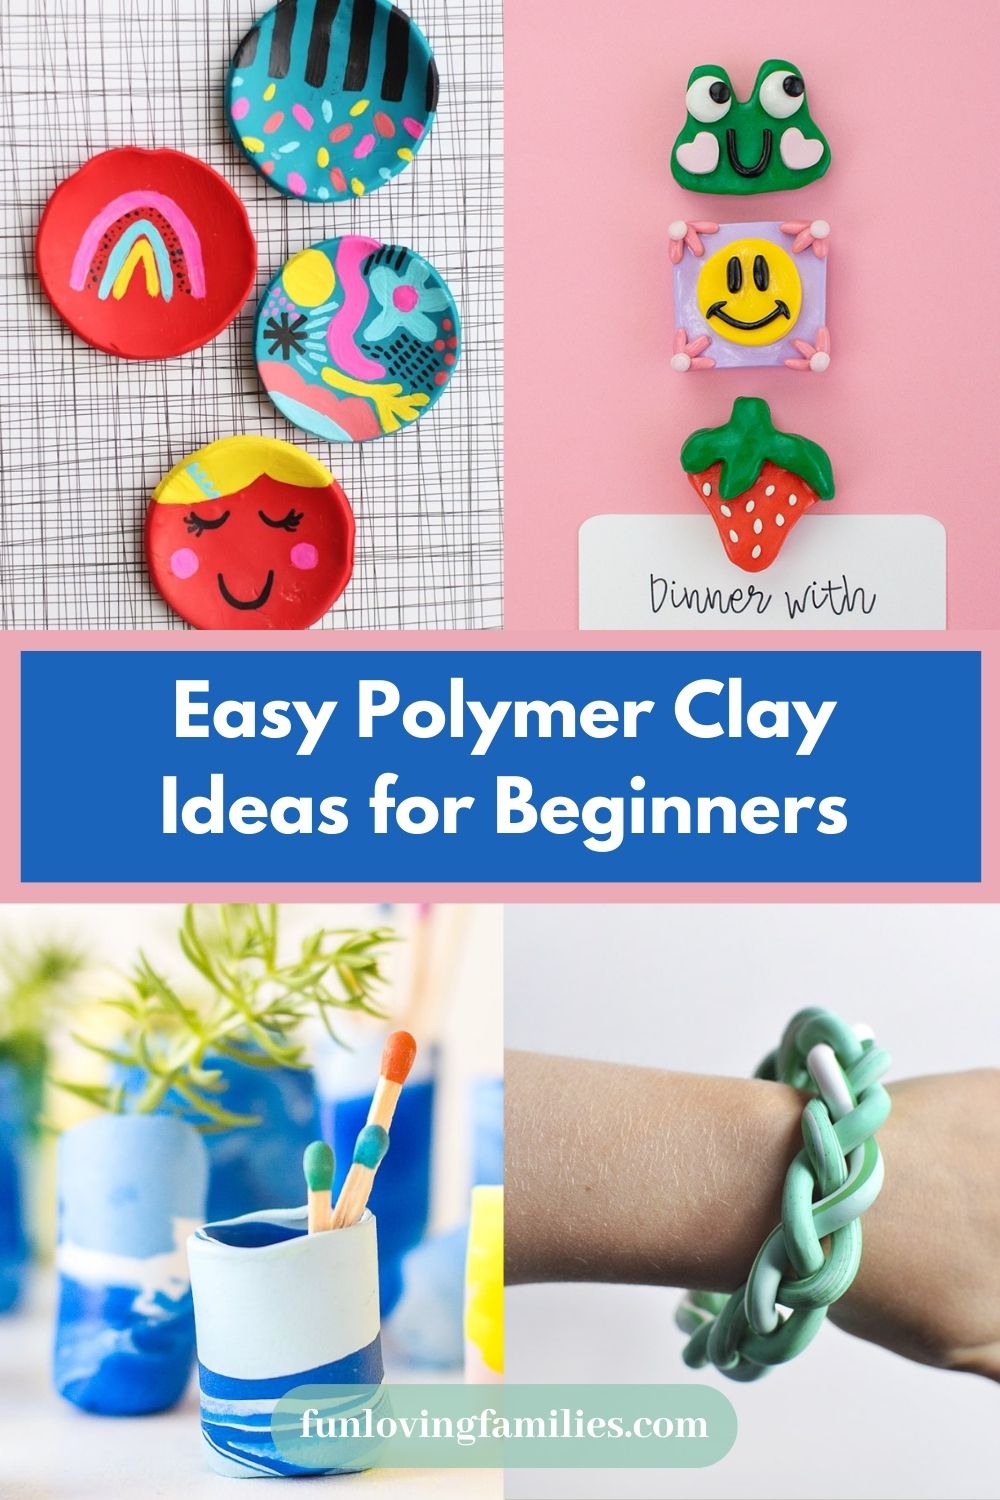 Easy Polymer Clay Ideas for Beginners